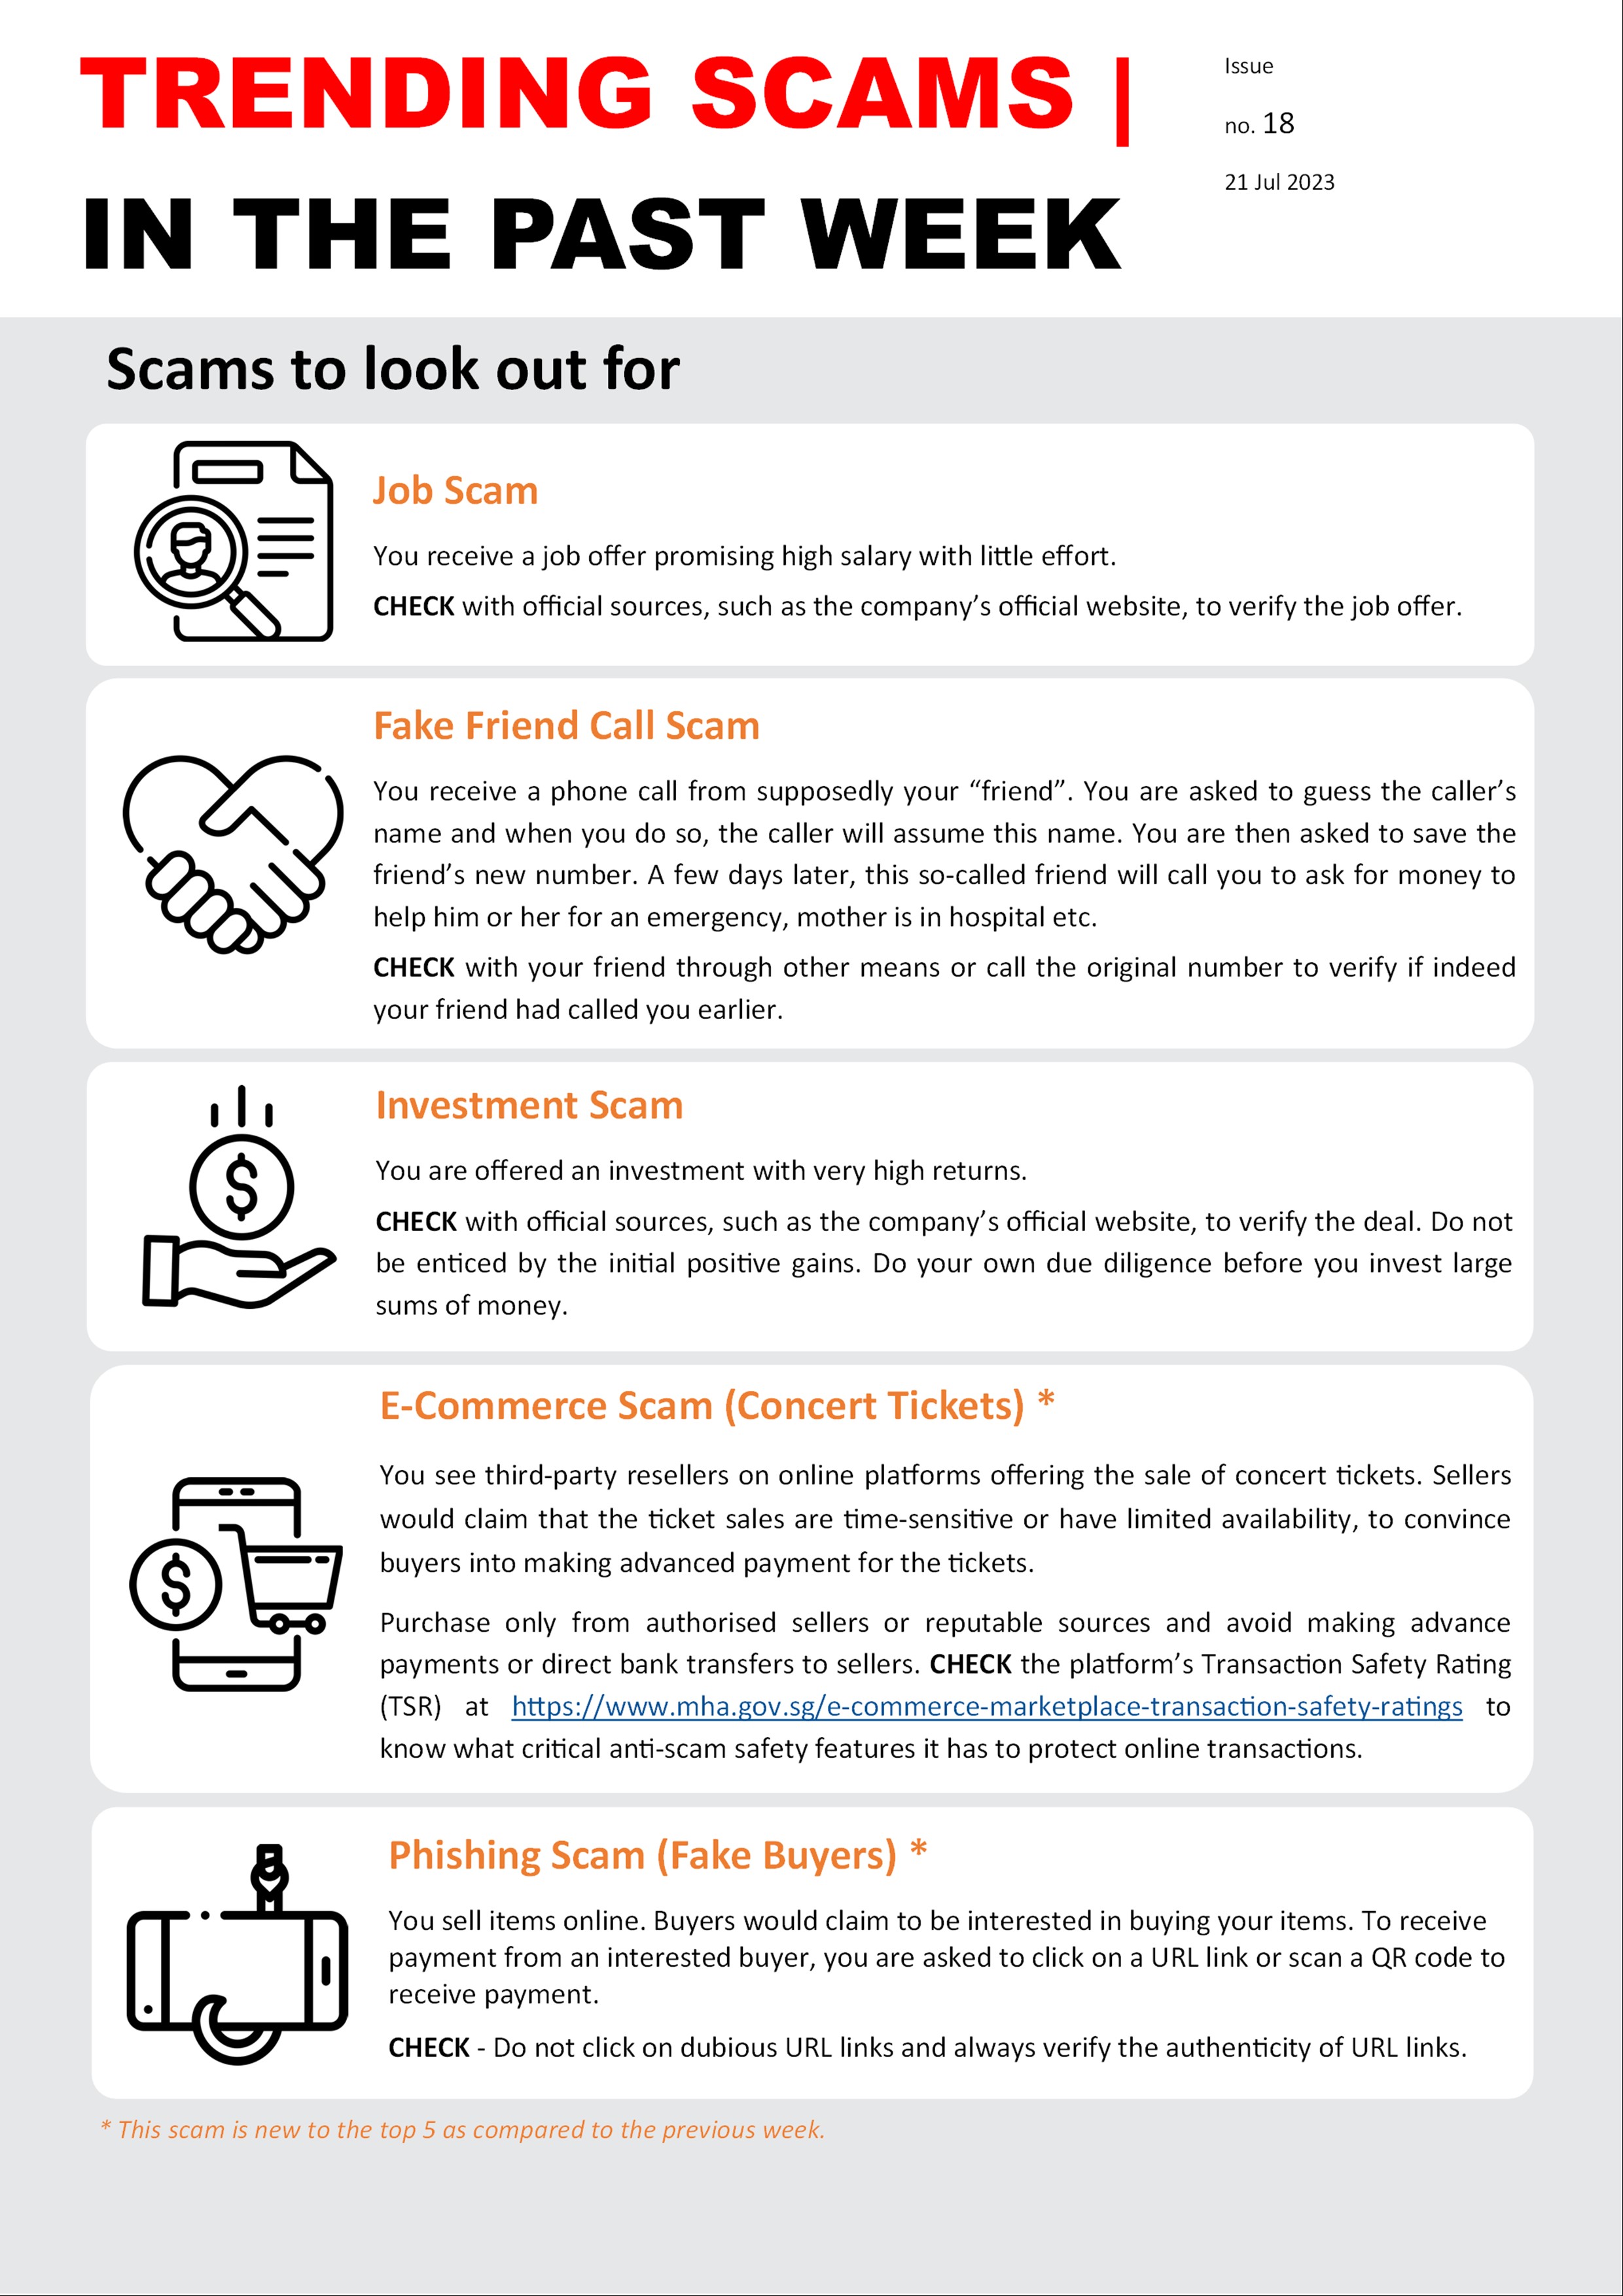 Trending Scams In the Past Week Issue No 18